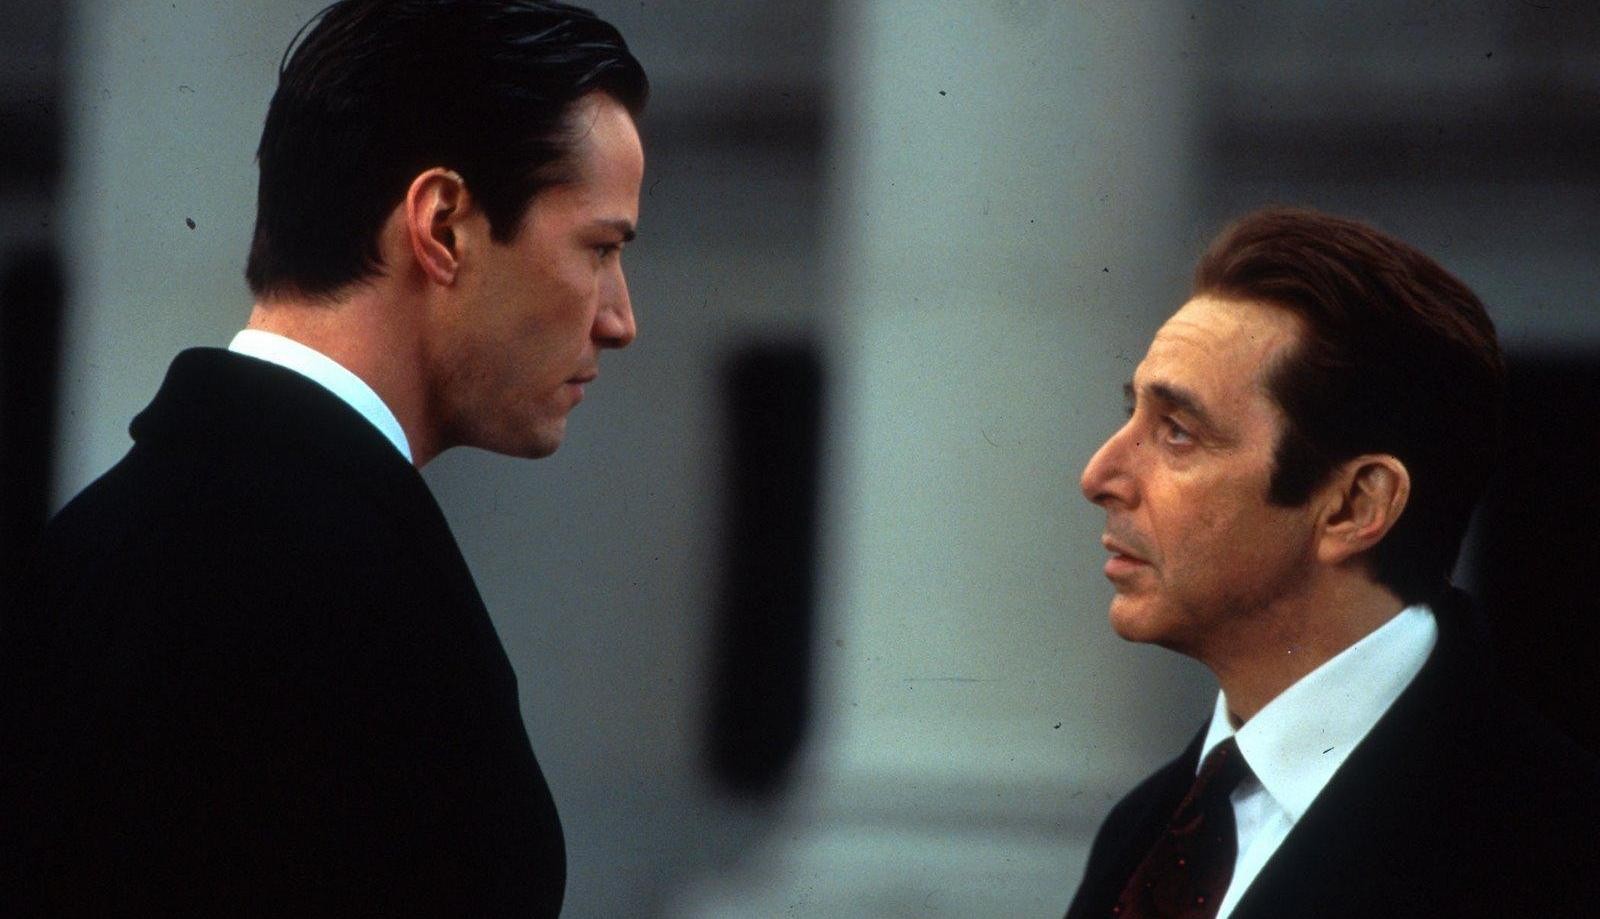 Al Pacino most famoulsy played Satan in 1997's The Devil's Advocate